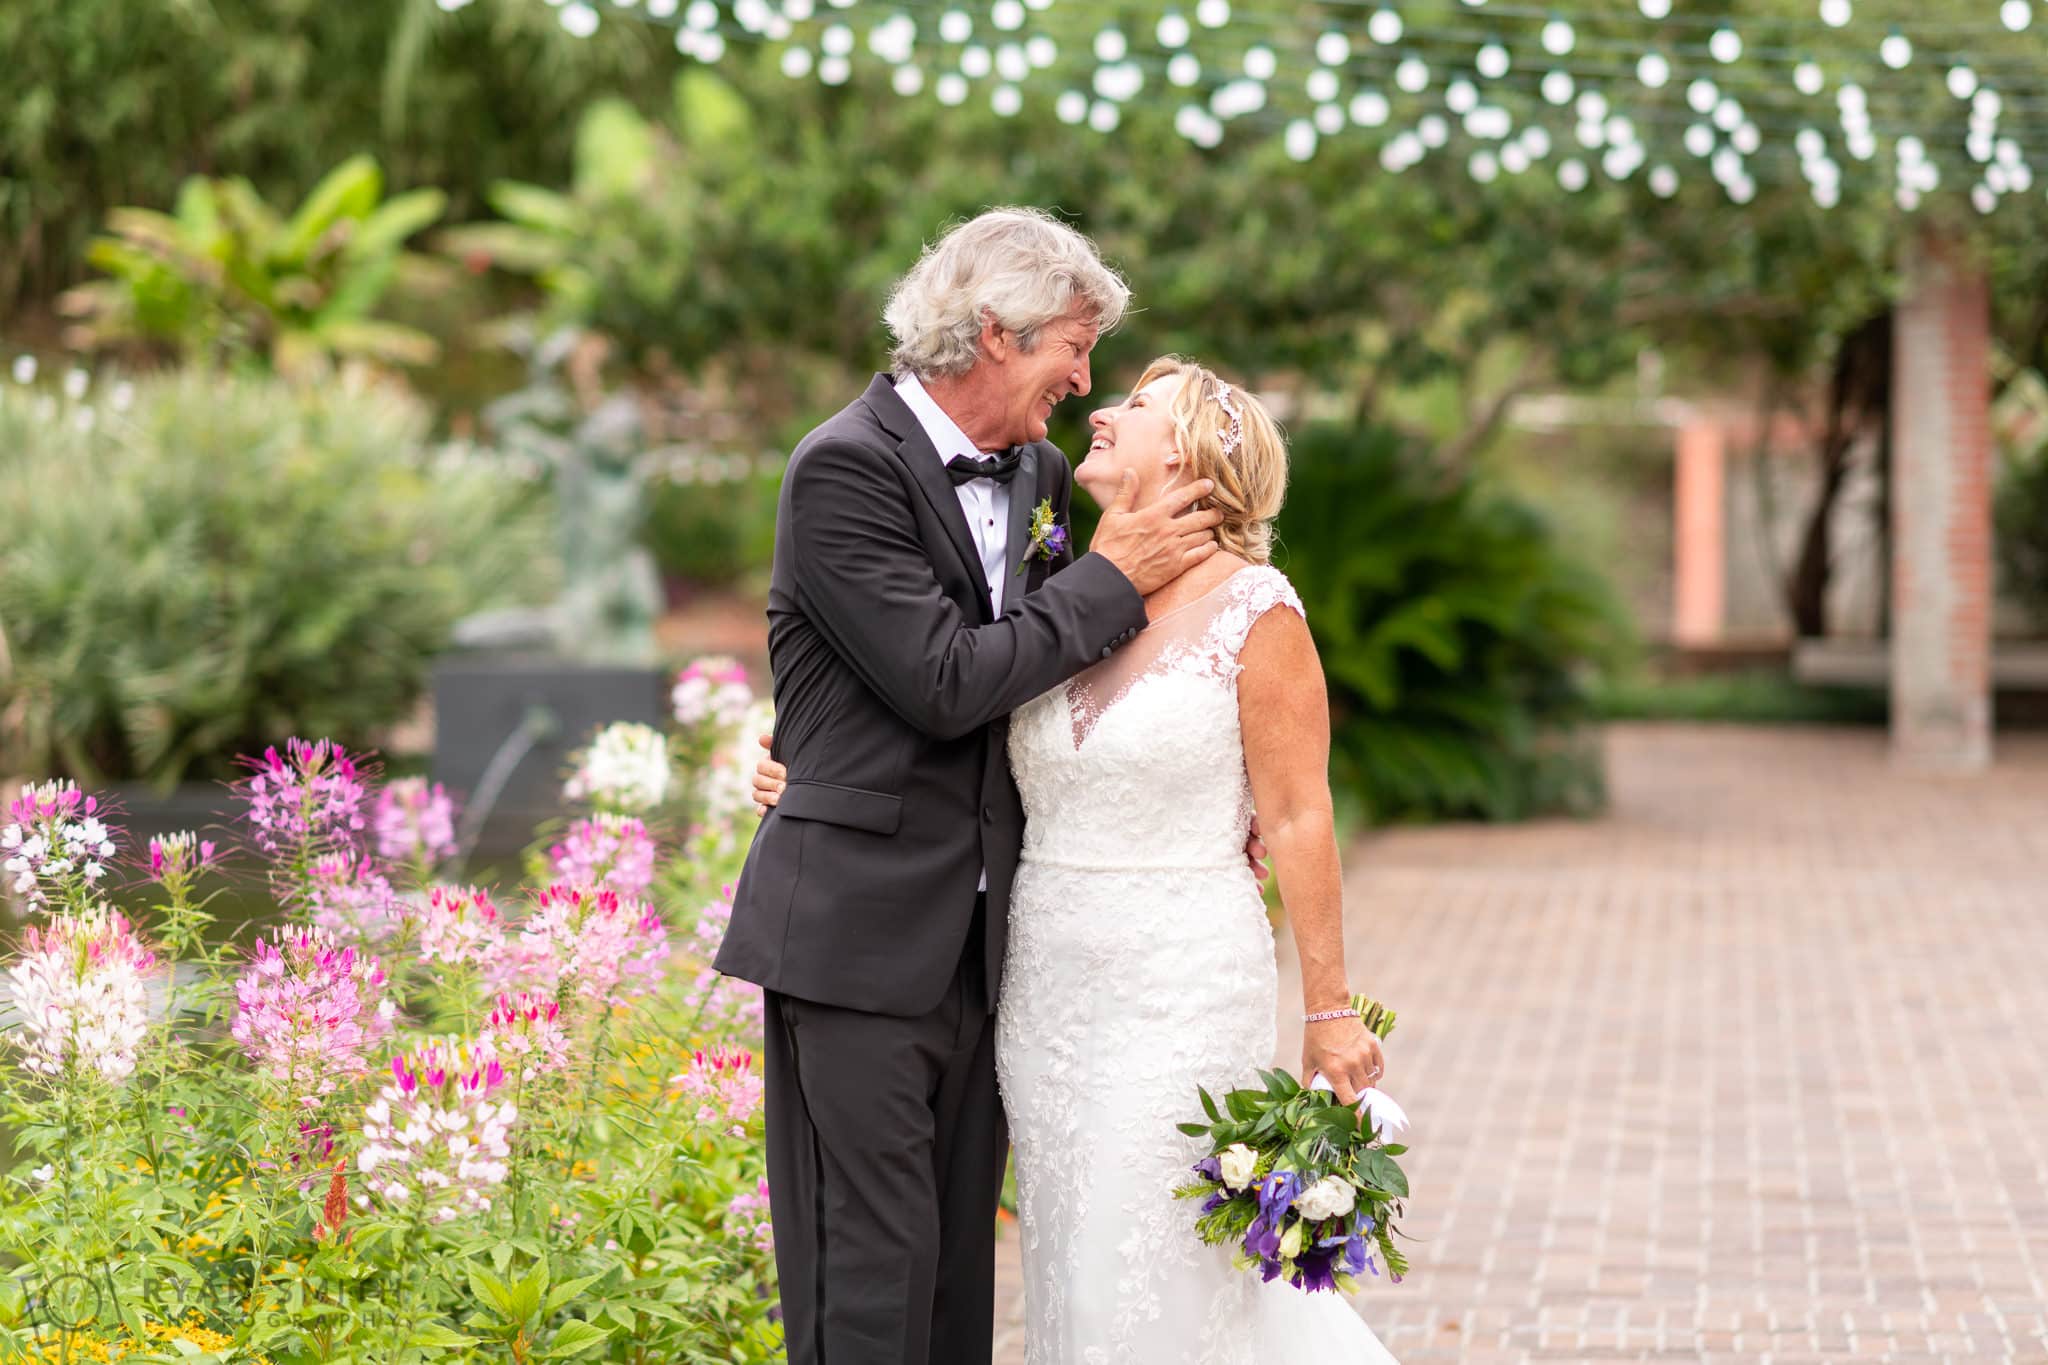 Groom touching bride's face - Fountain of the Muses - Brookgreen Gardens